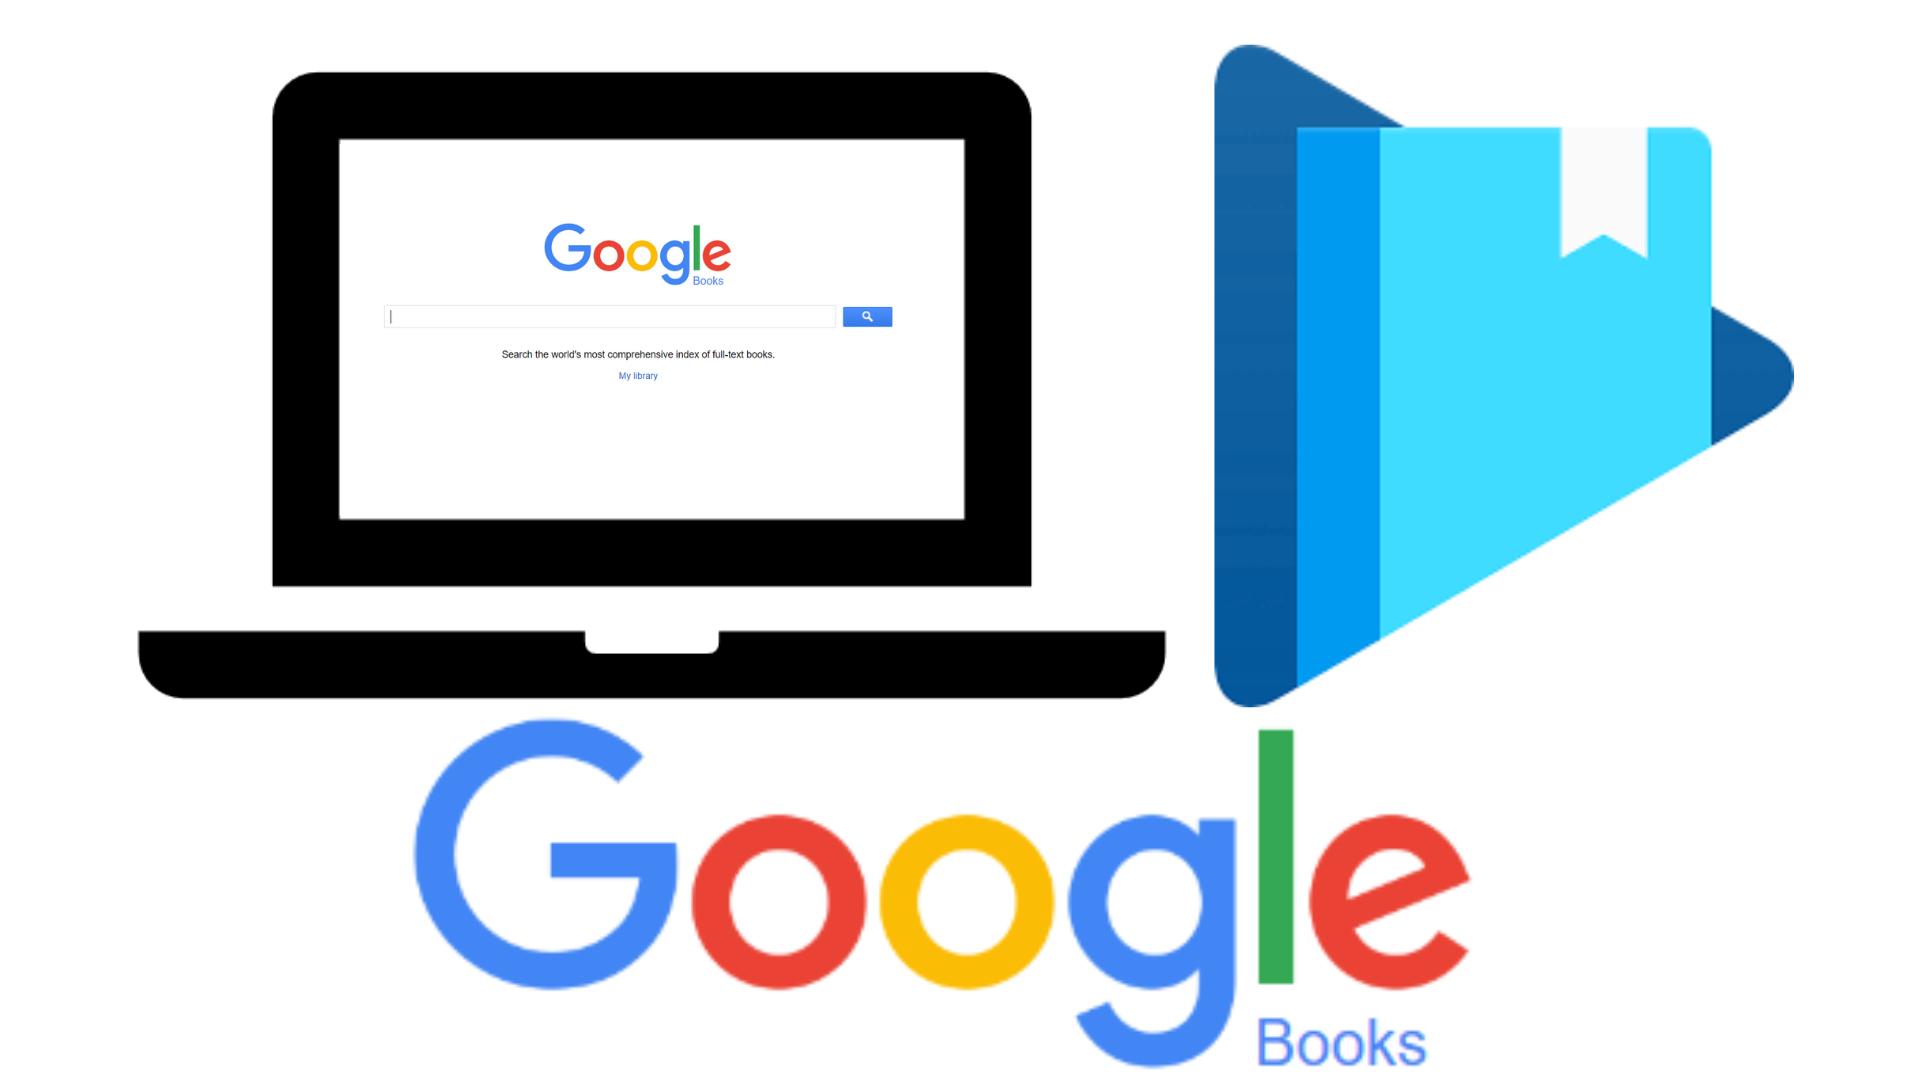 Google books new additional service update graphic